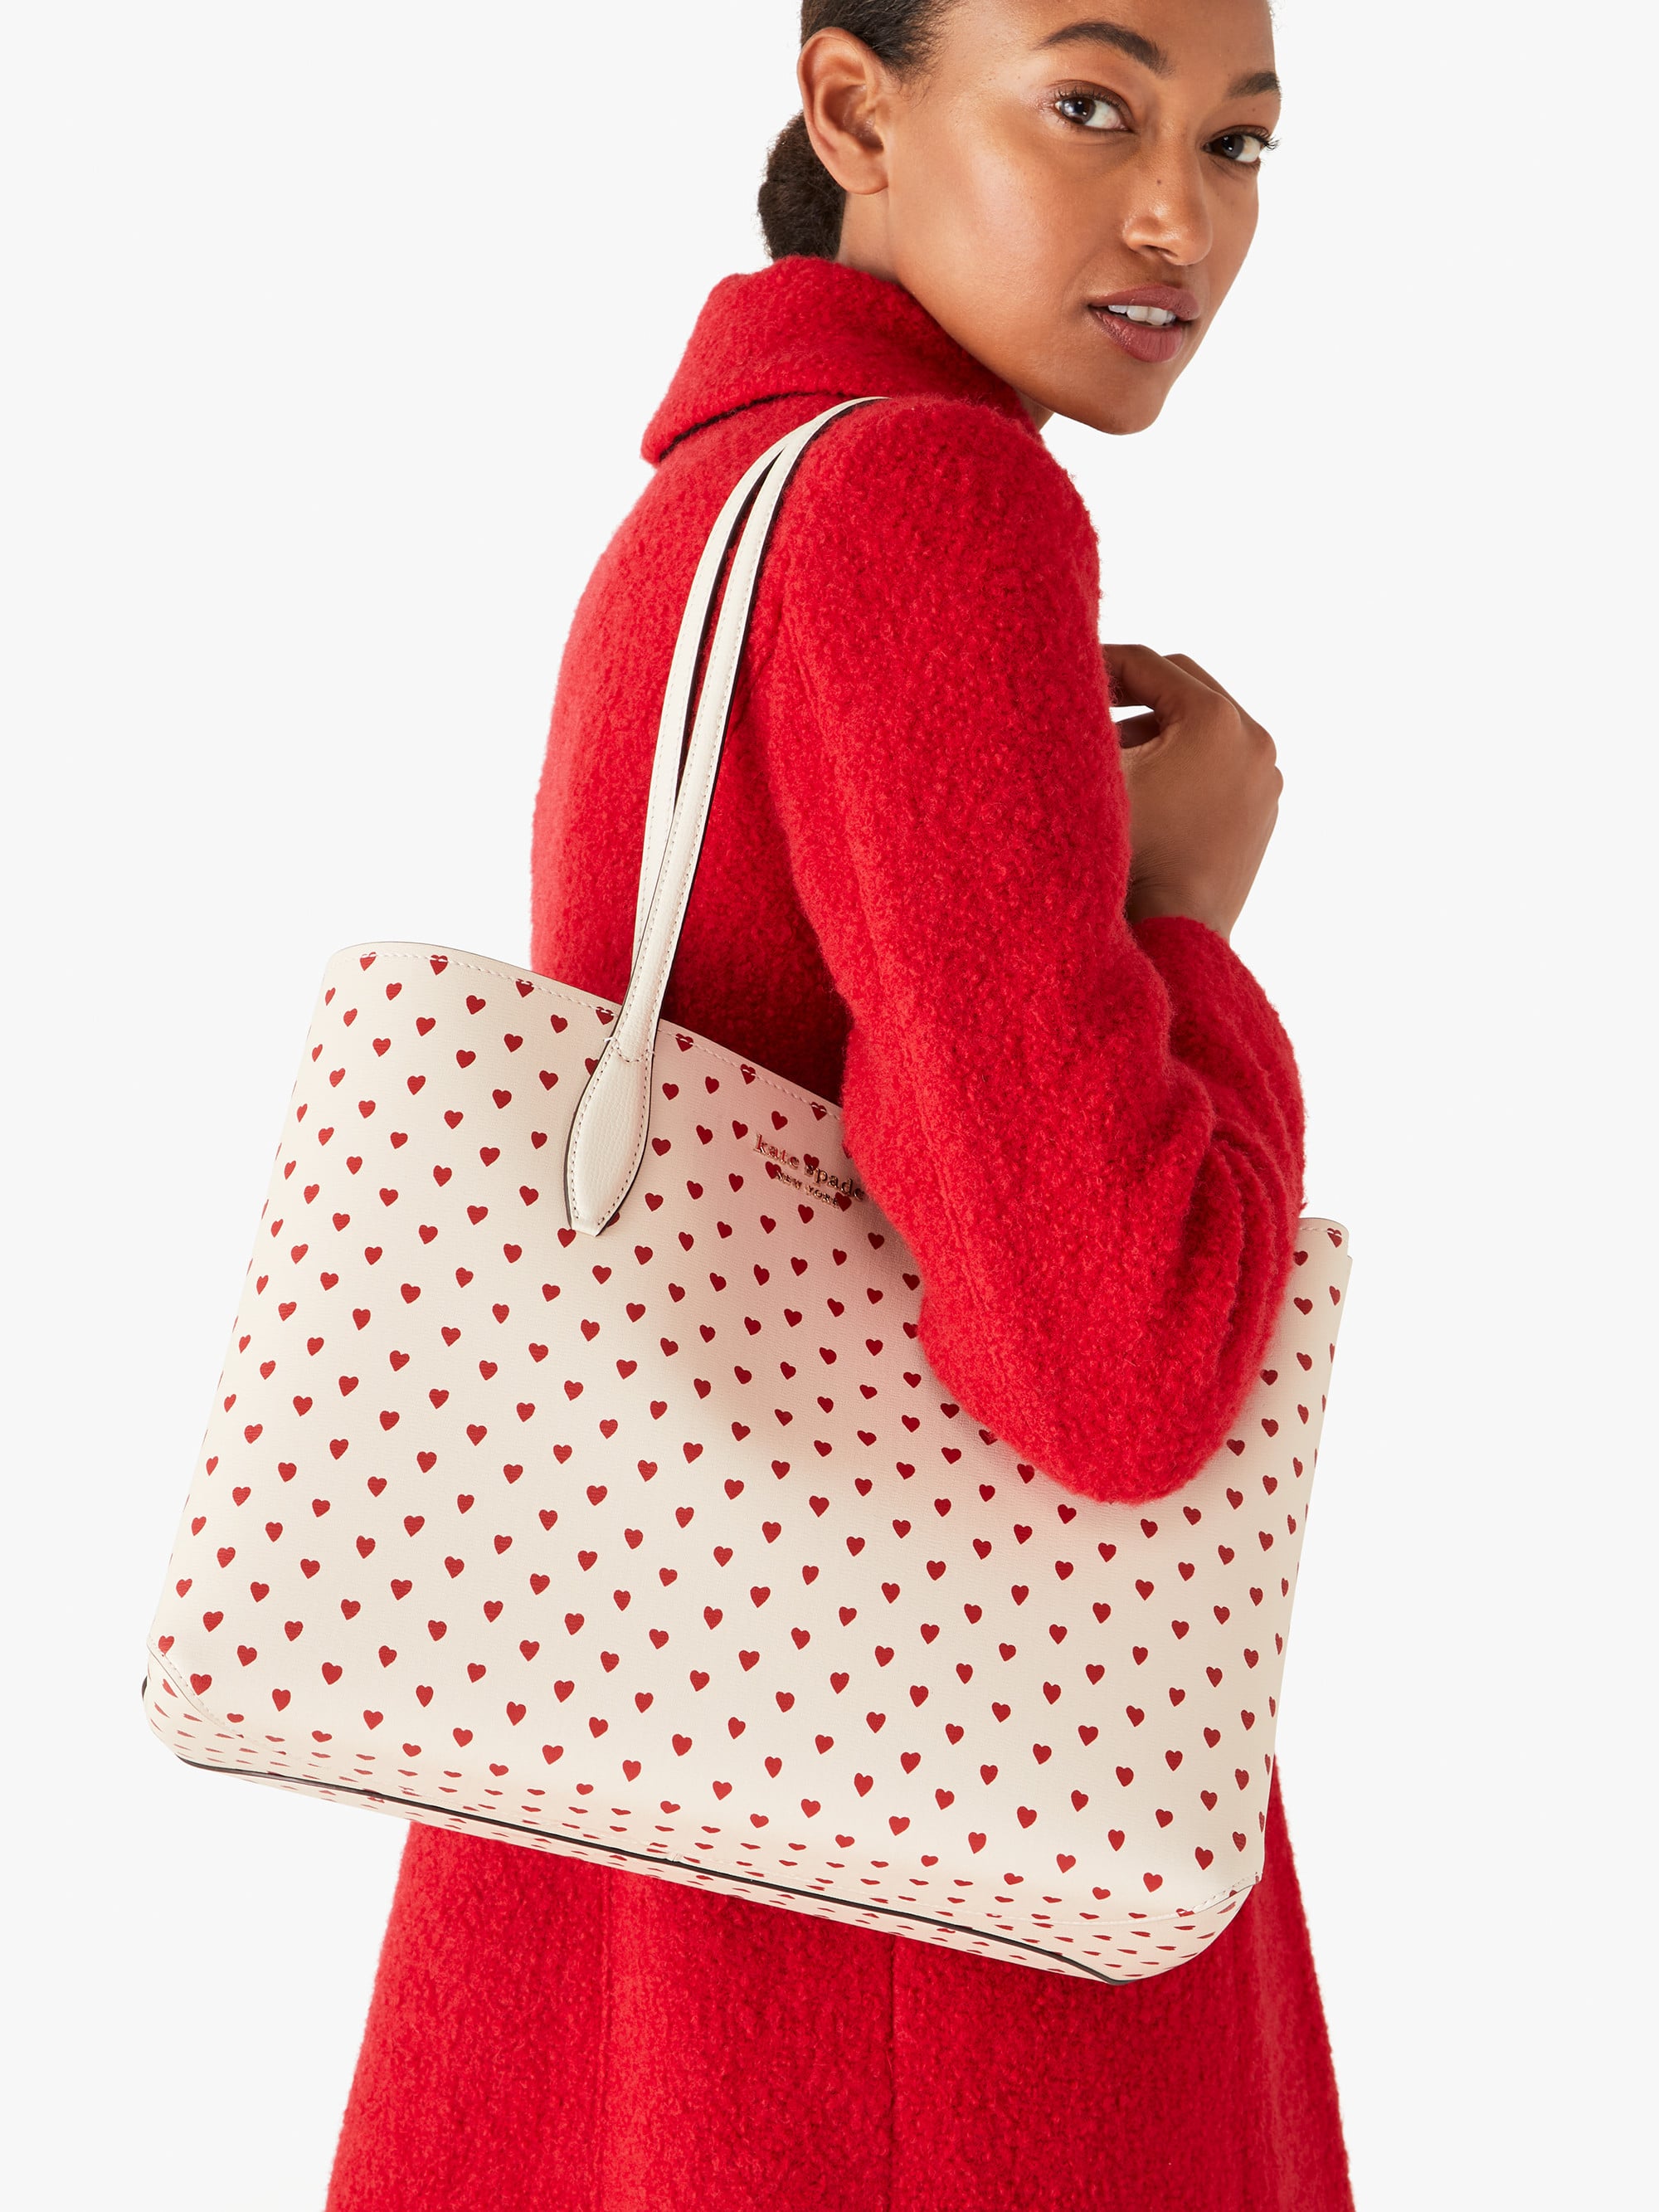 Kate Spade Valentine's Day 2023 Collection